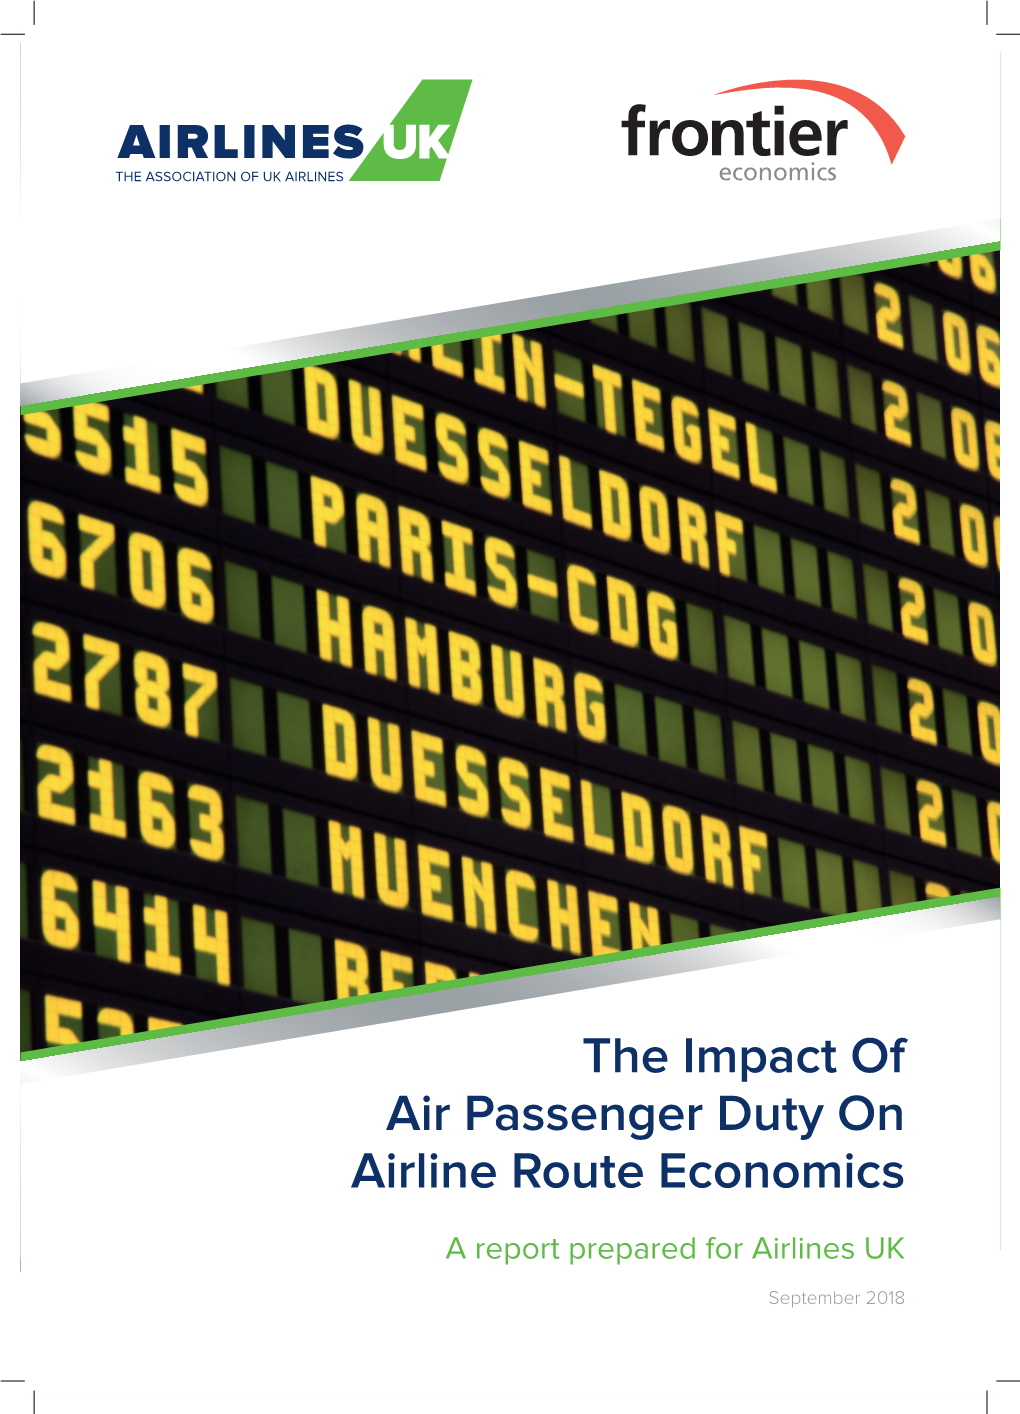 The Impact of Air Passenger Duty on Airline Route Economics